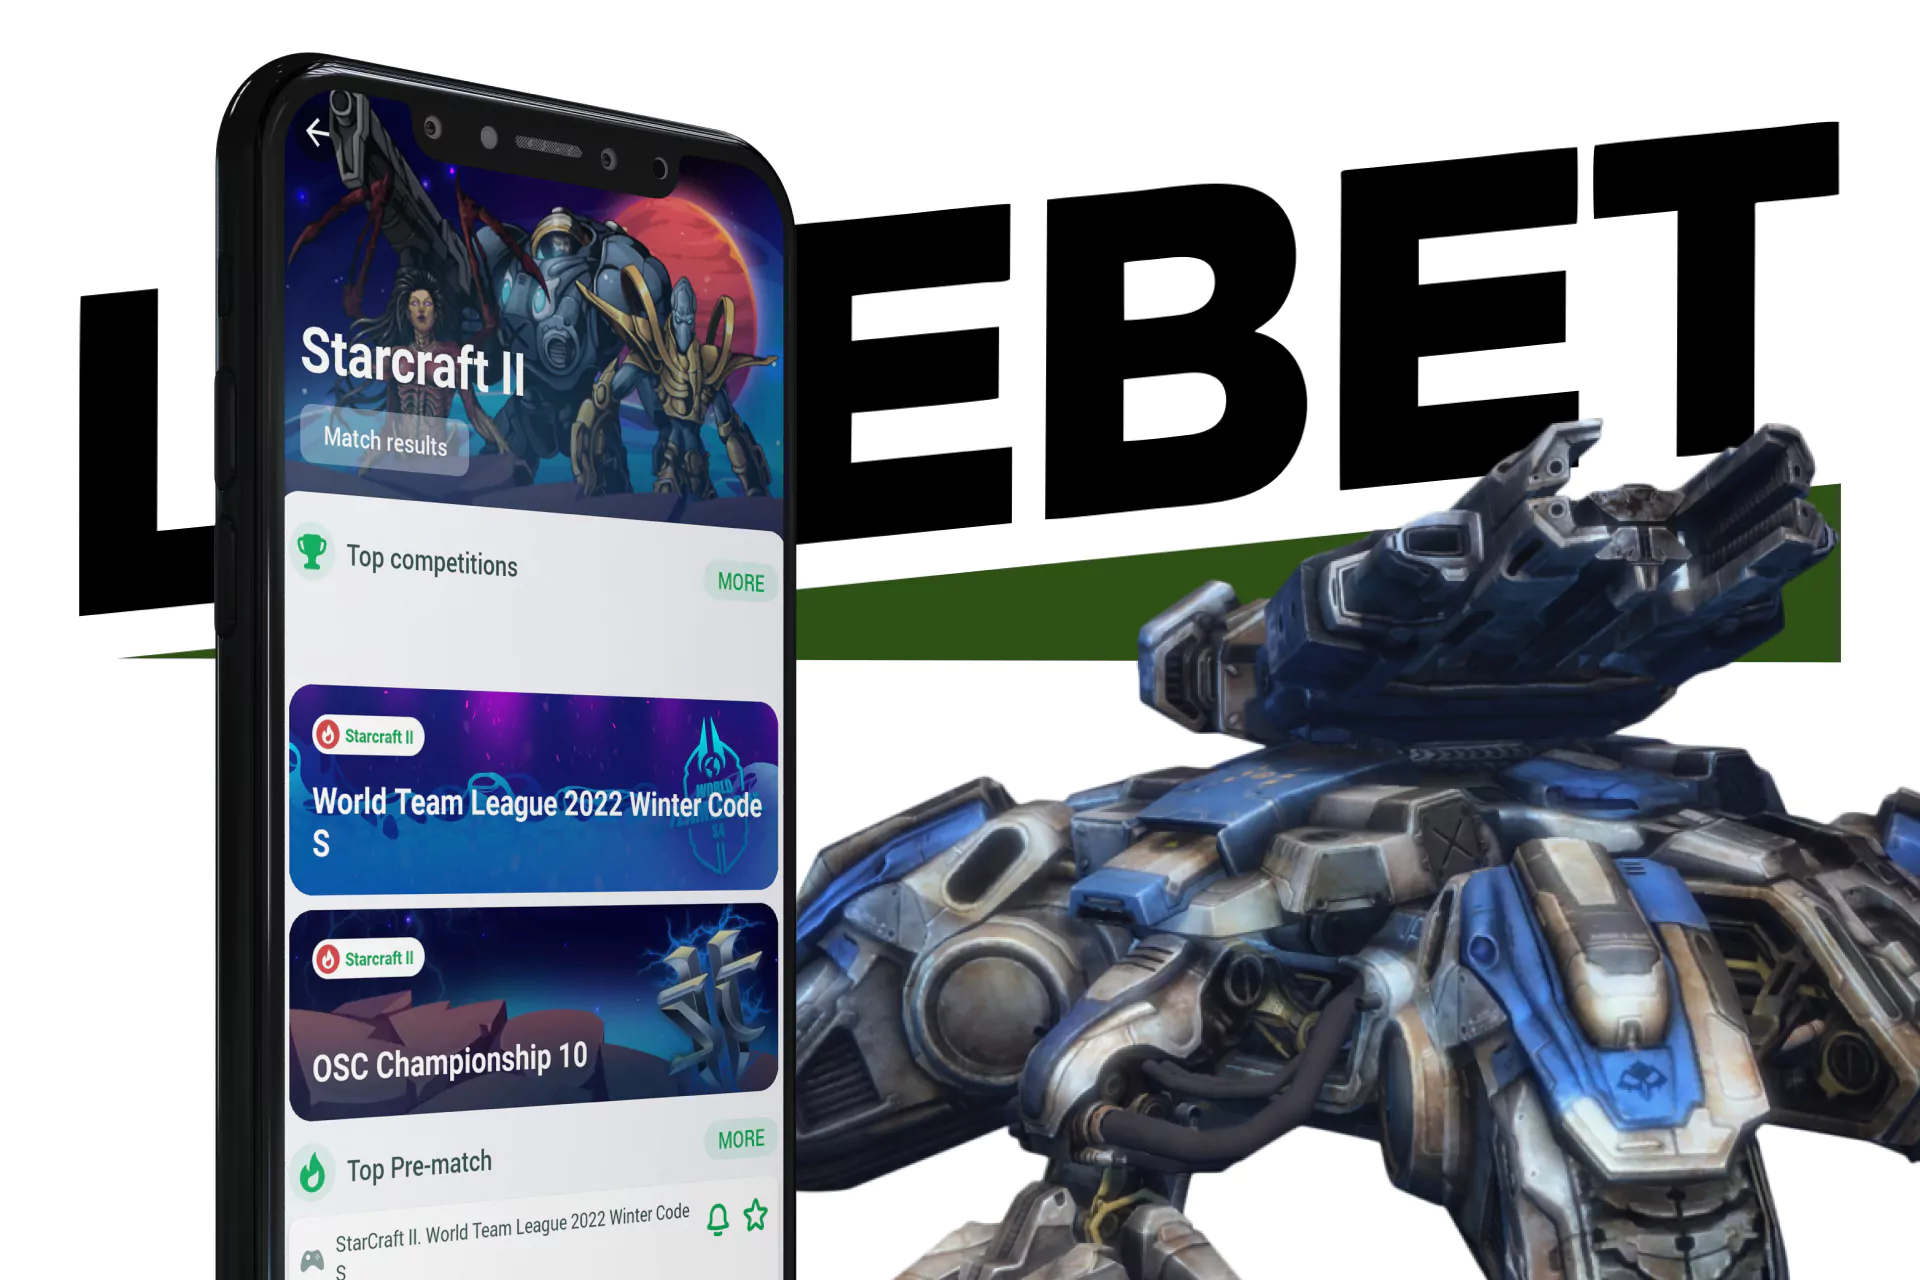 You can always use your phone to bet on StarCraft 2 on Linebet.